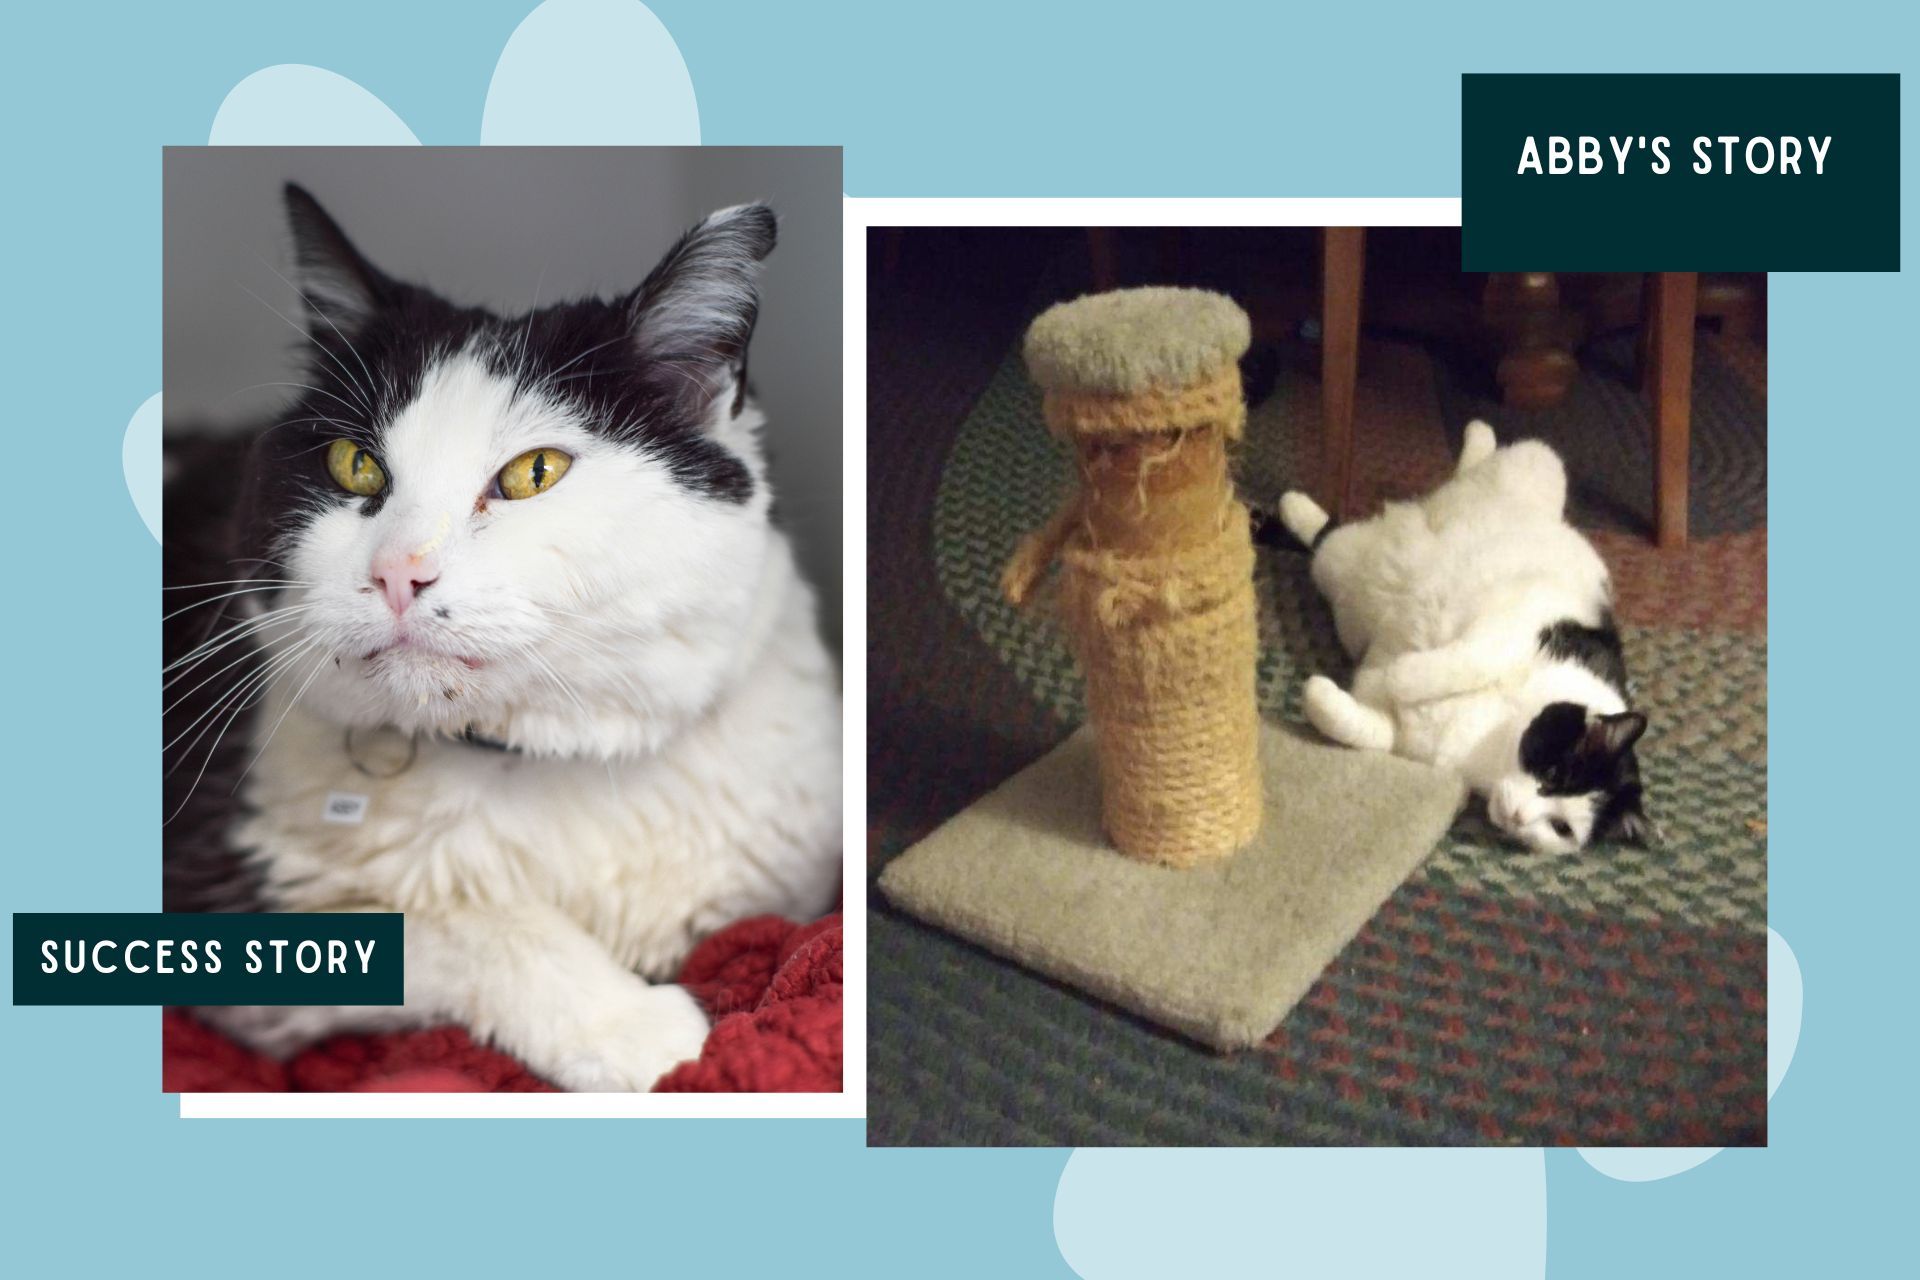 Happily Homed: Abby’s Story